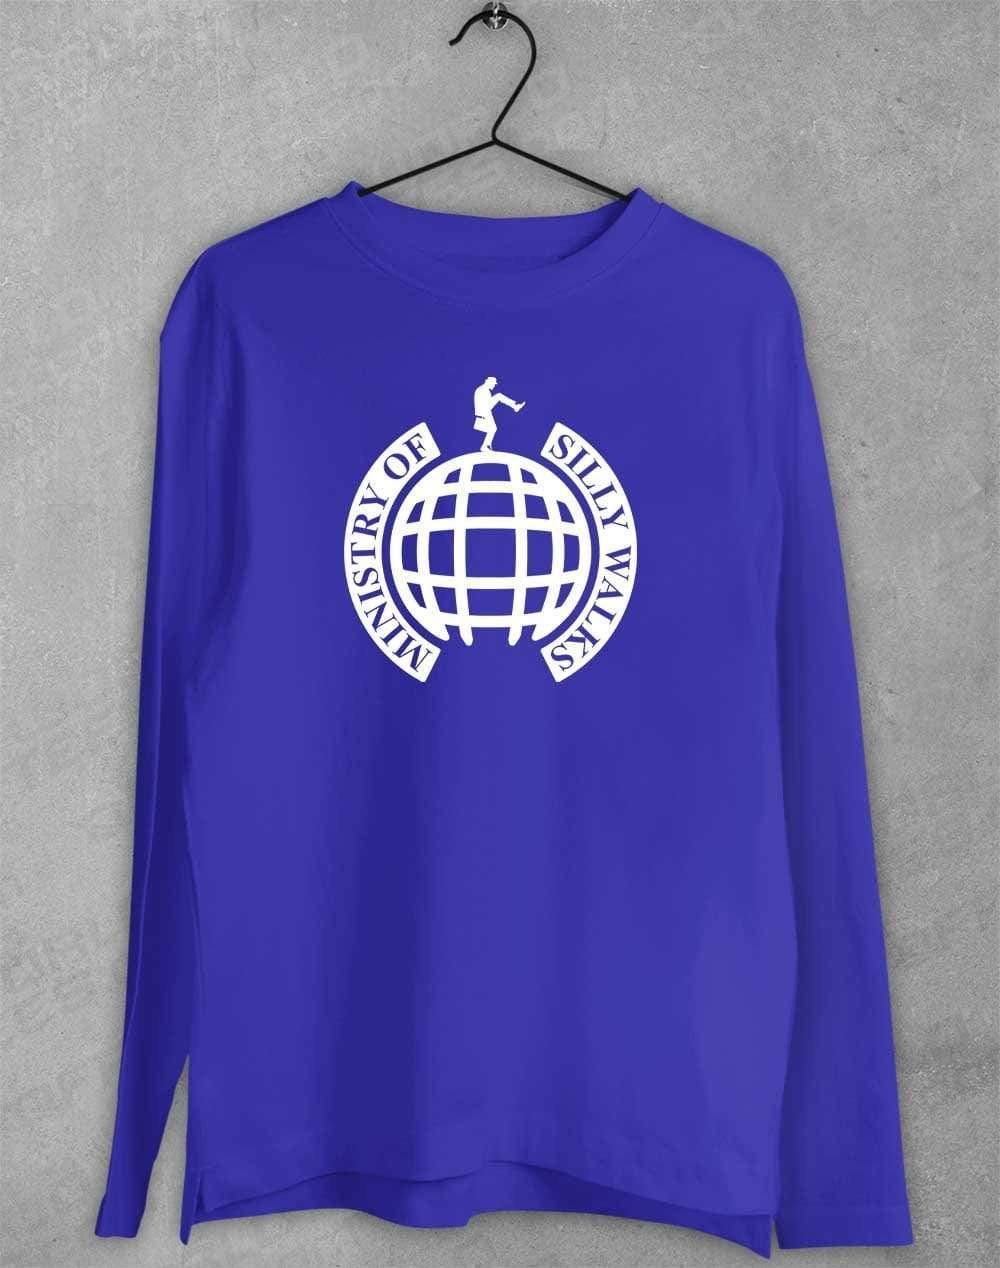 Ministry of Silly Walks Long Sleeve T-Shirt S / Royal  - Off World Tees